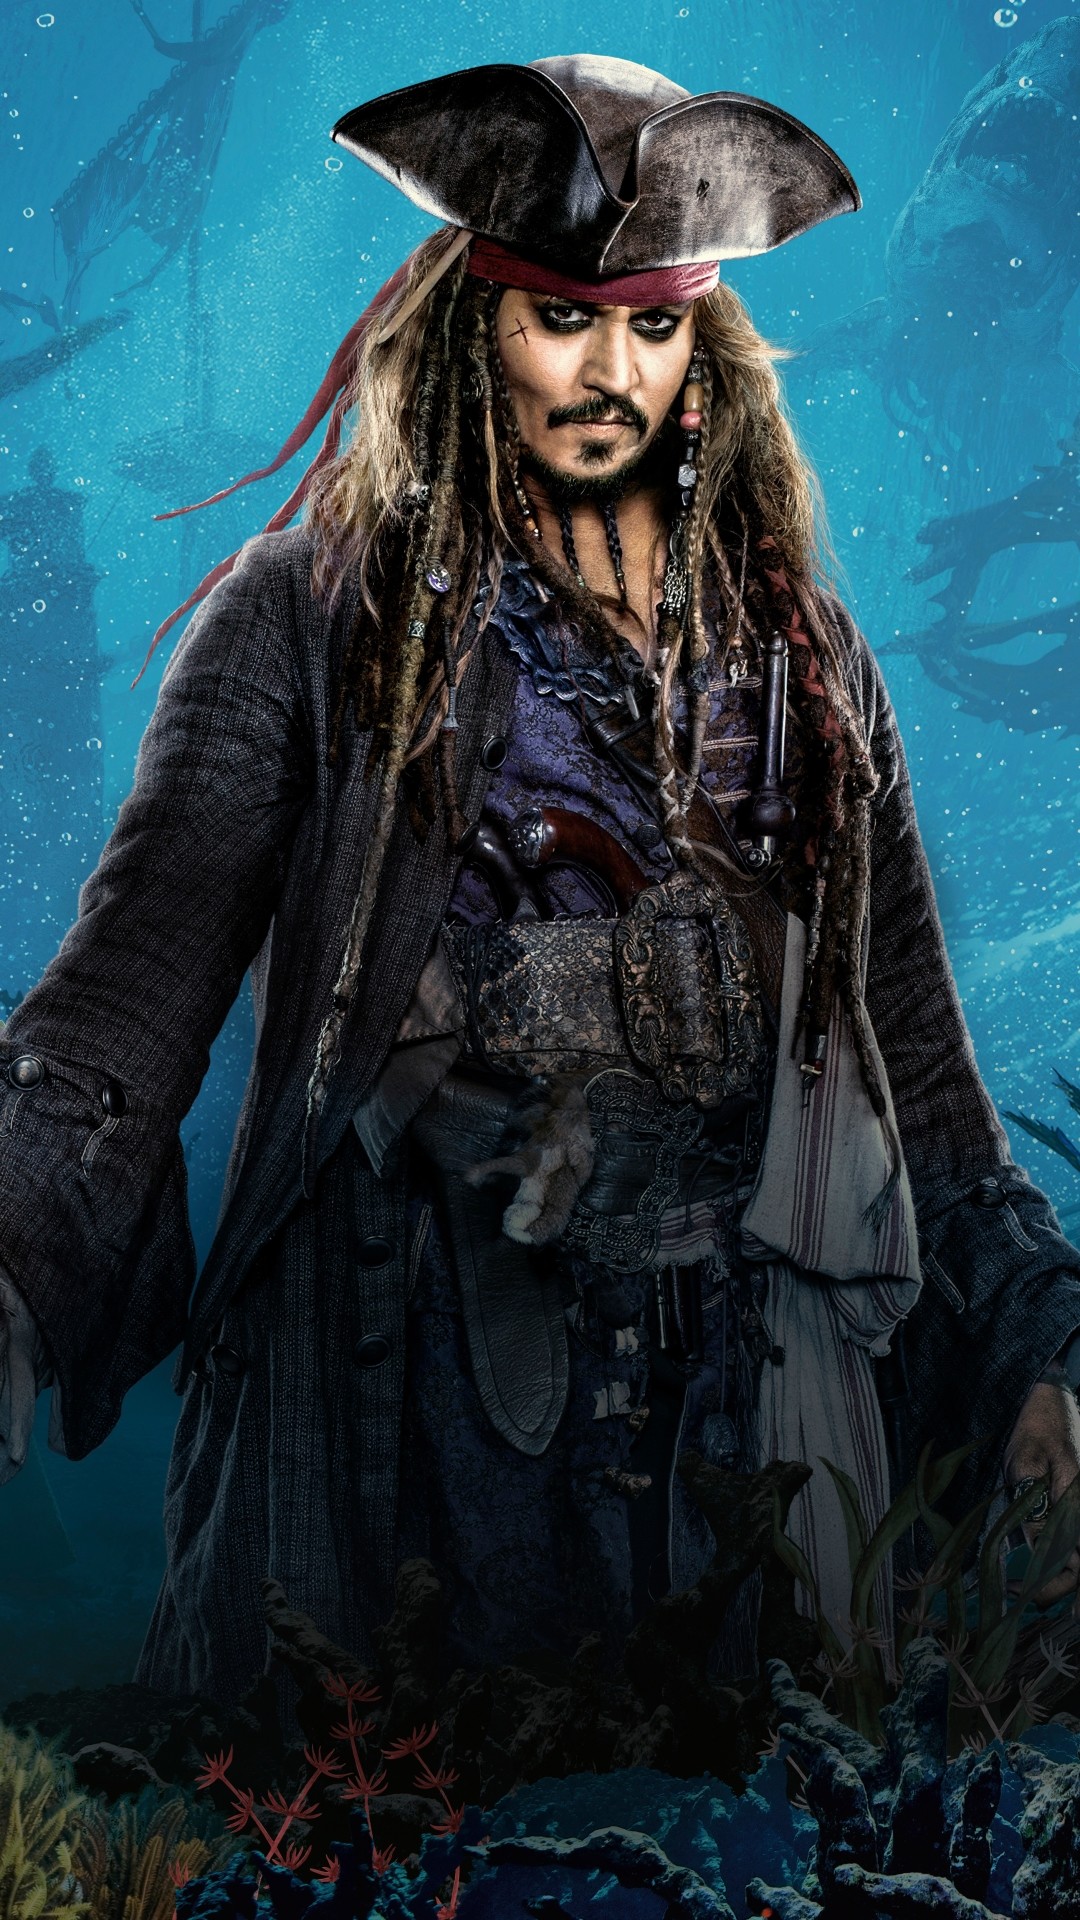 1080x1920 Pirates of the Caribbean Dead Men Tell No Tales Javier